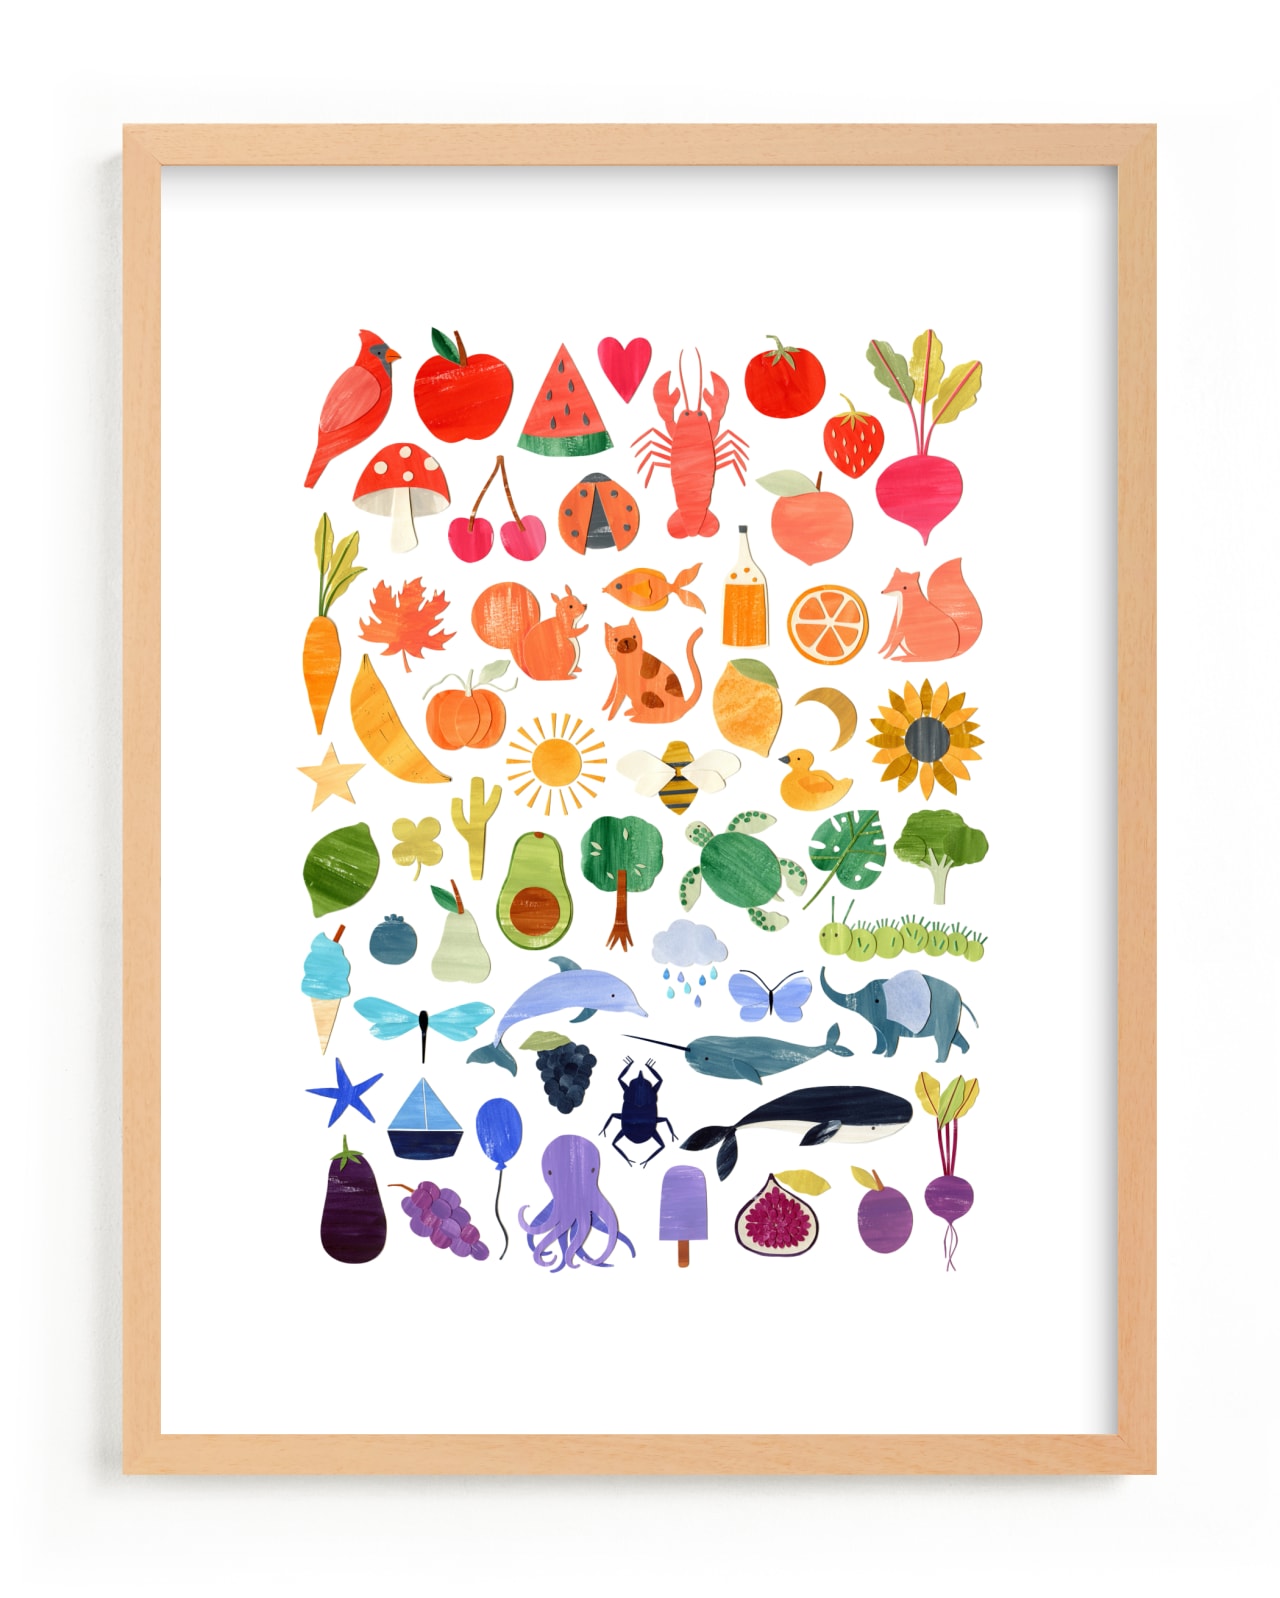 framed print of illustrations of objects in a rainbow of colors